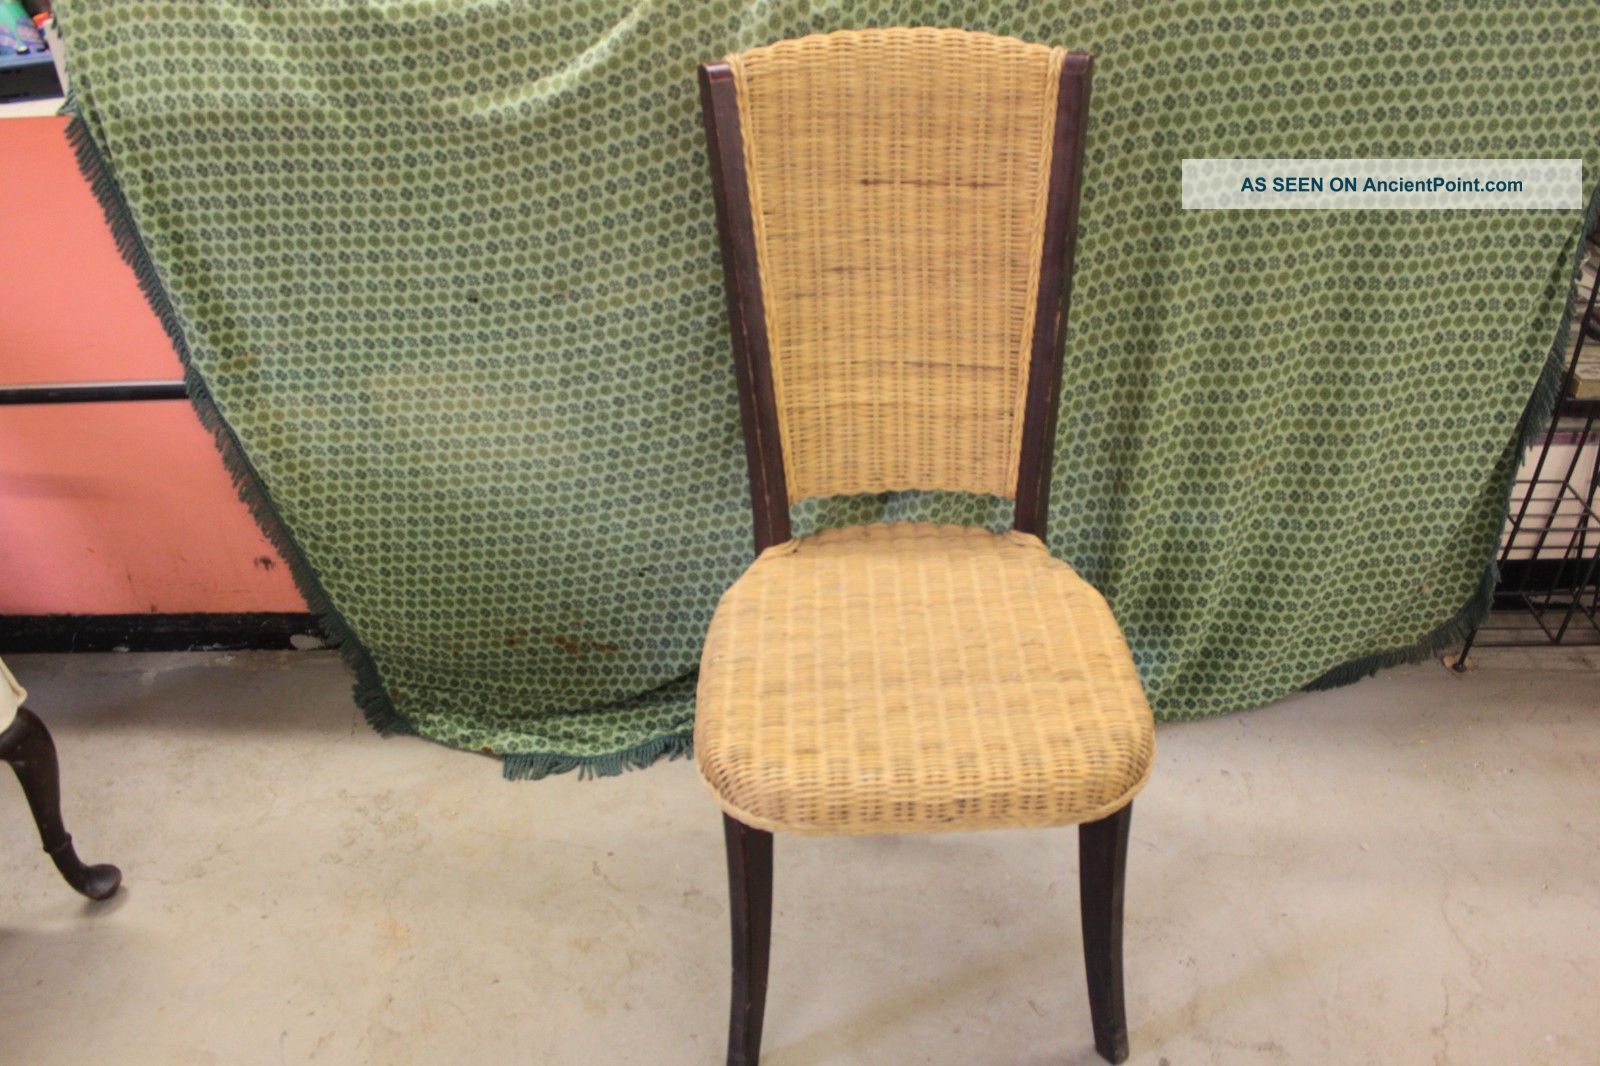 Vintage High Back Cane Chair 1900-1950 photo